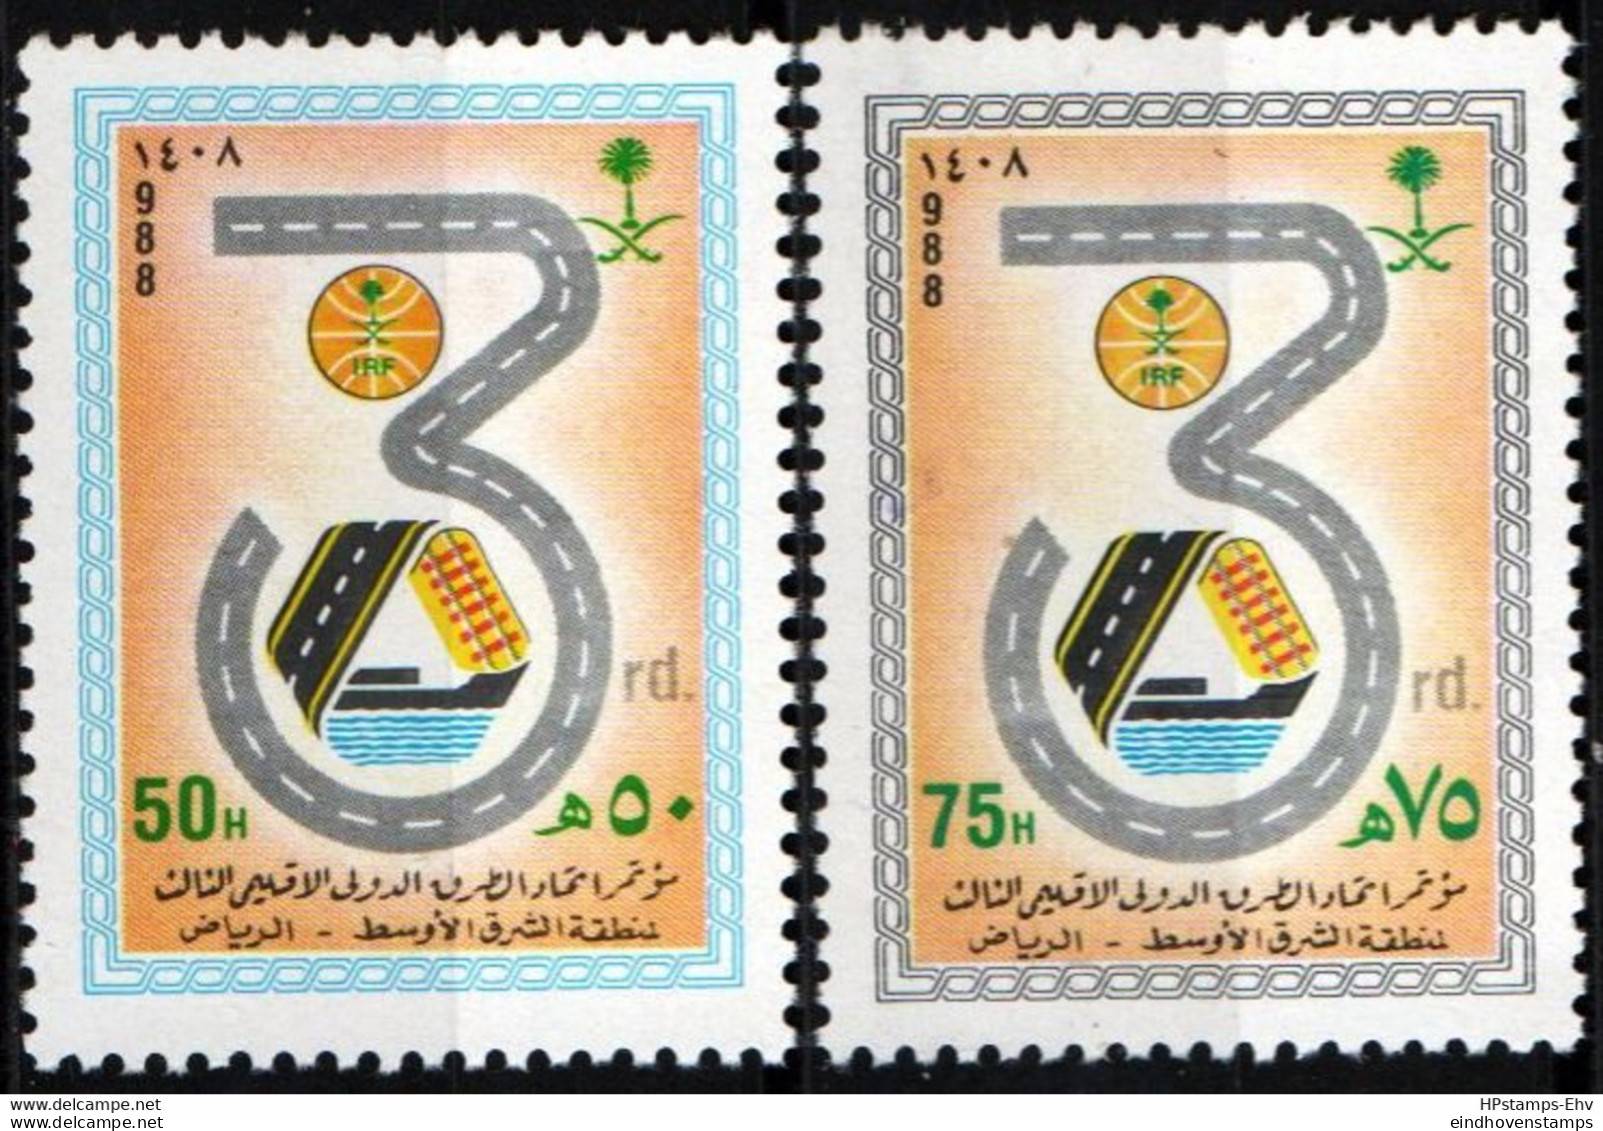 Saudi Arabia 1988 Traffic Conference For The Middle East 2 Values MNH SA-88-01 Road Design - Otros (Tierra)